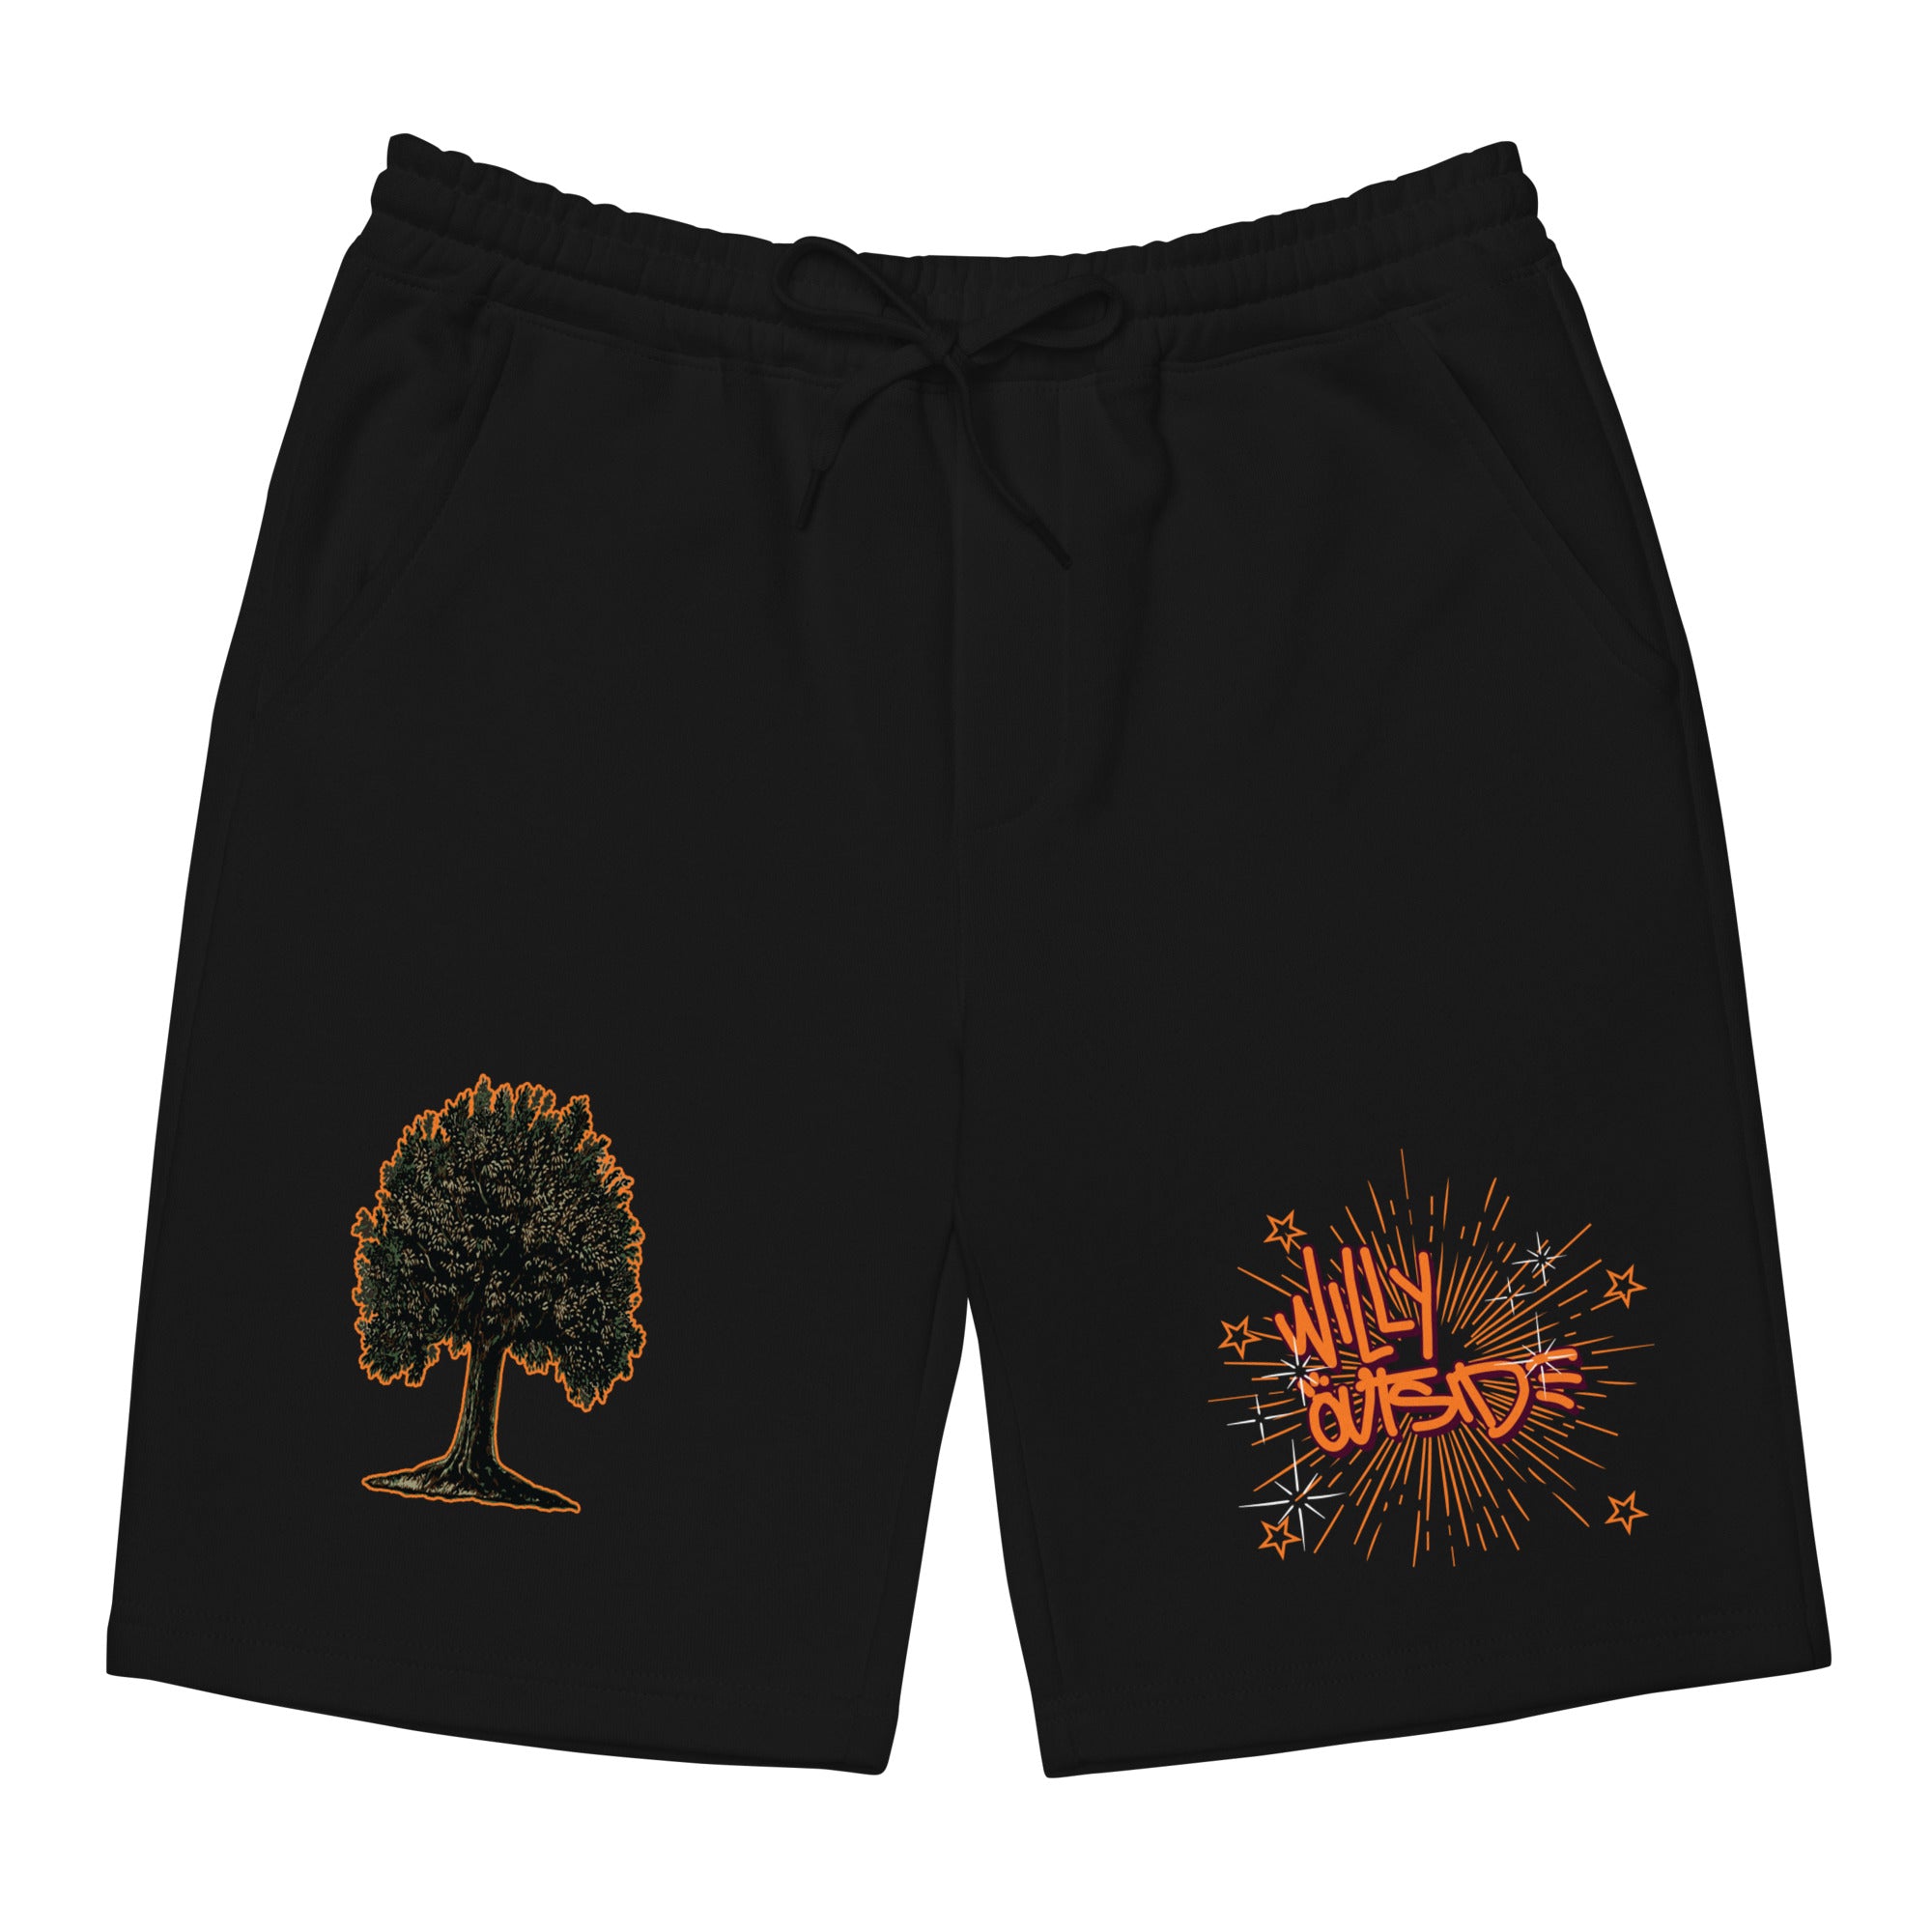 LIMITED "Willy Outside" Men's fleece shorts